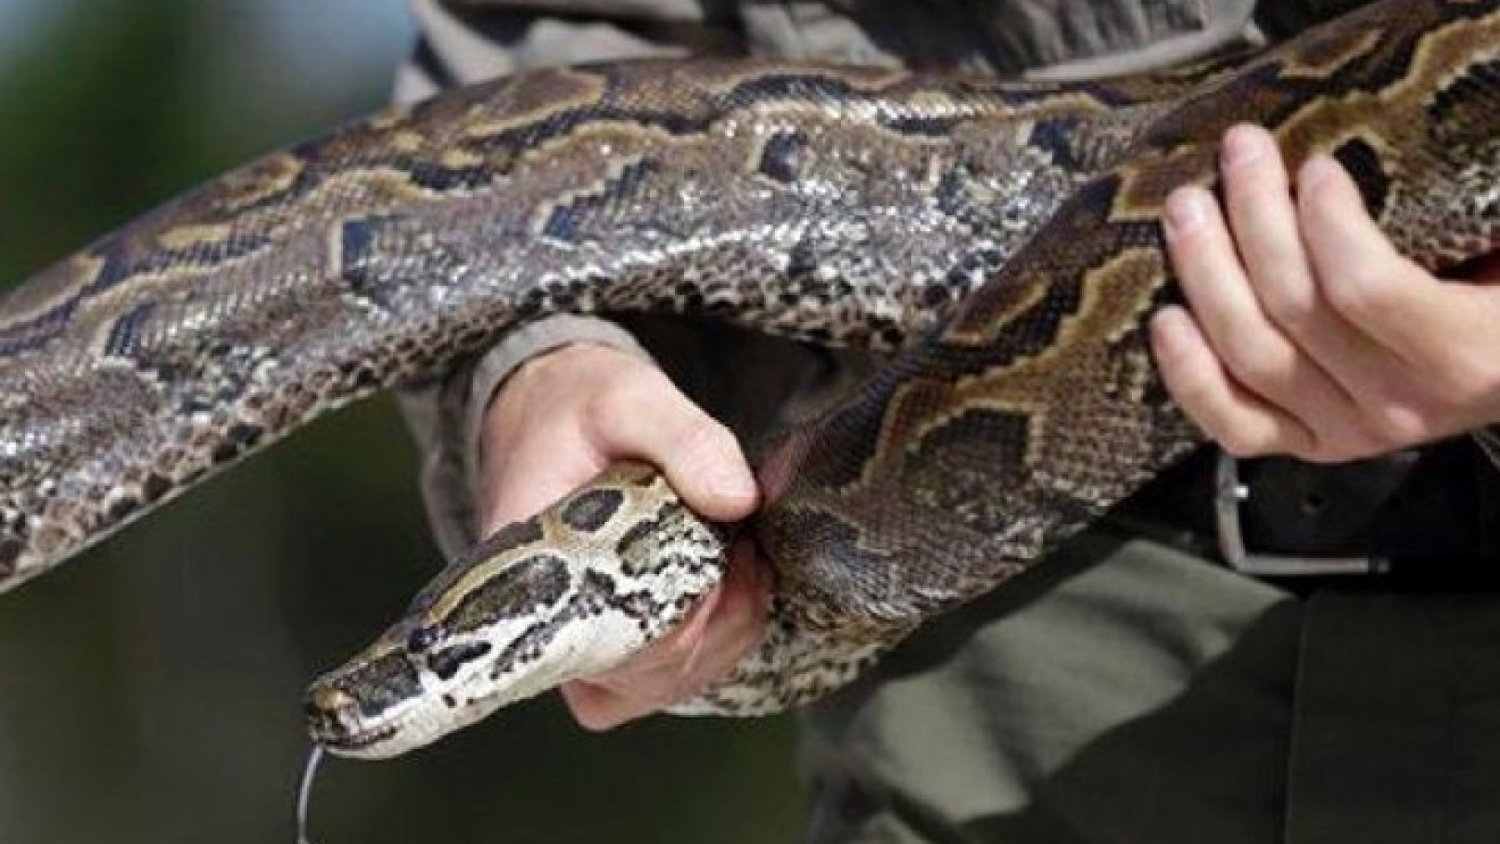 Indonesian woman dies after being swallowed whole by a python